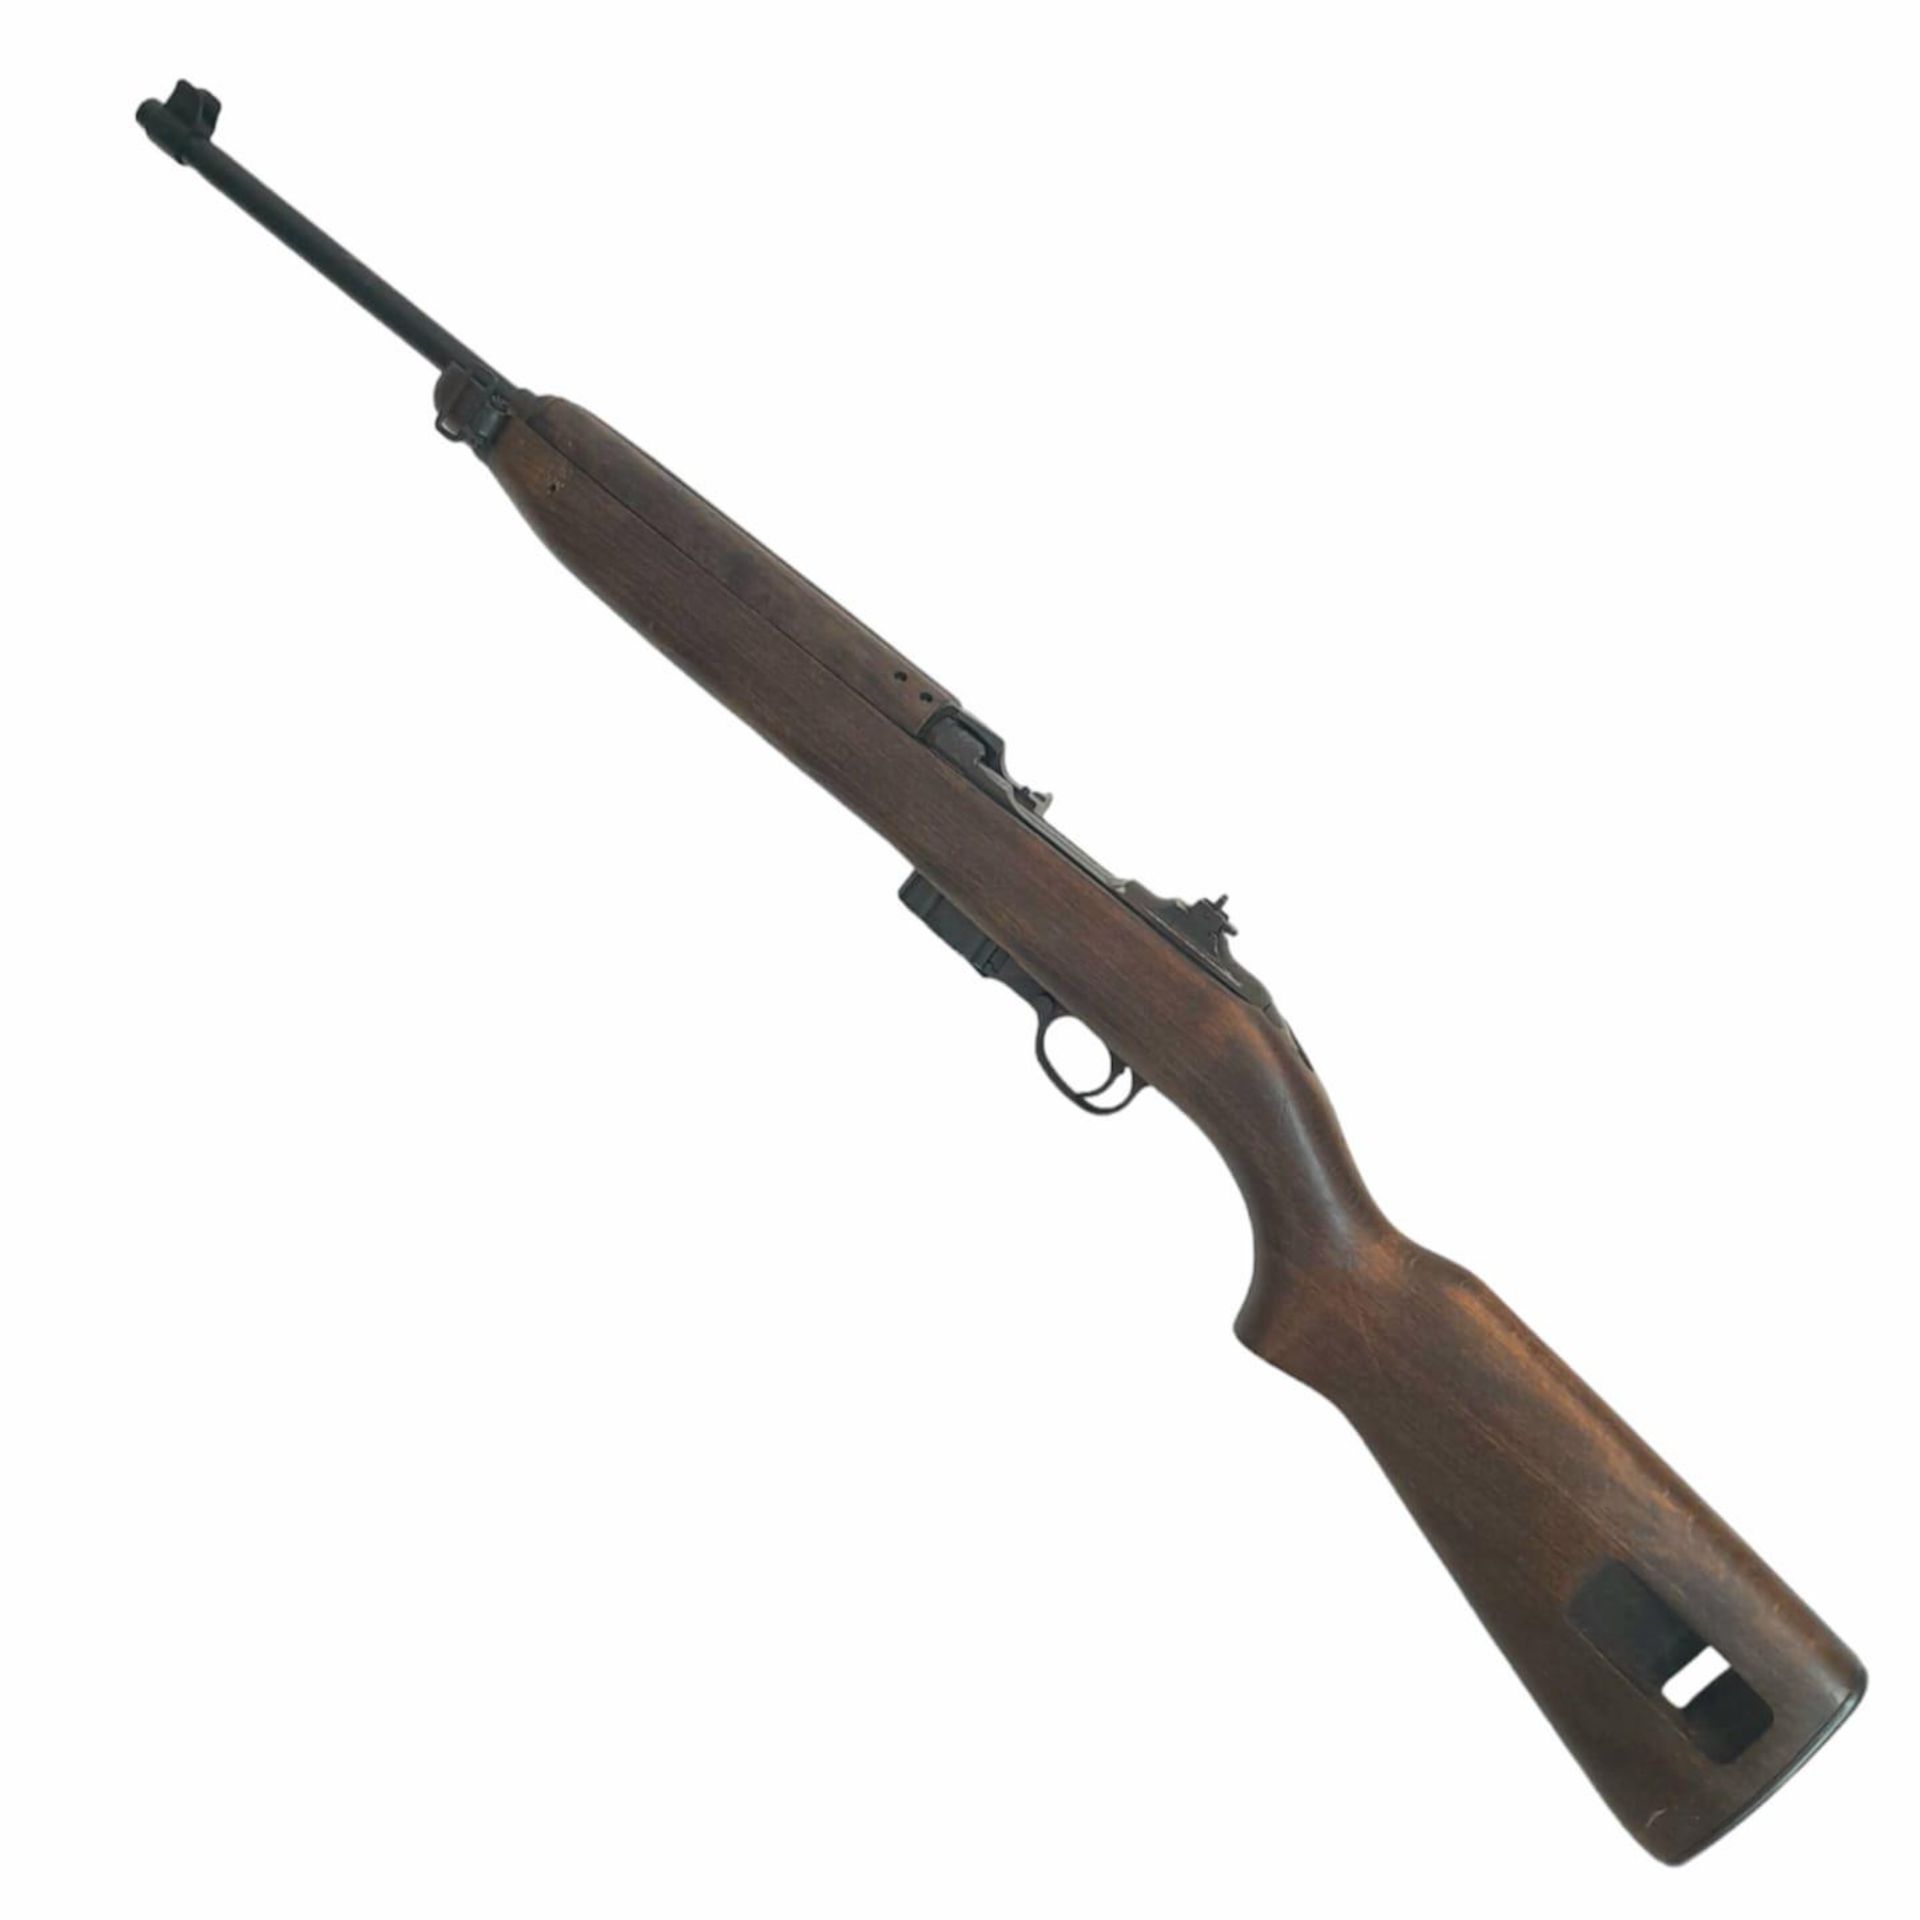 A Deactivated Winchester M1 Carbine Self Loading Rifle. Used by the USA in warfare from 1942-73 this - Bild 3 aus 12